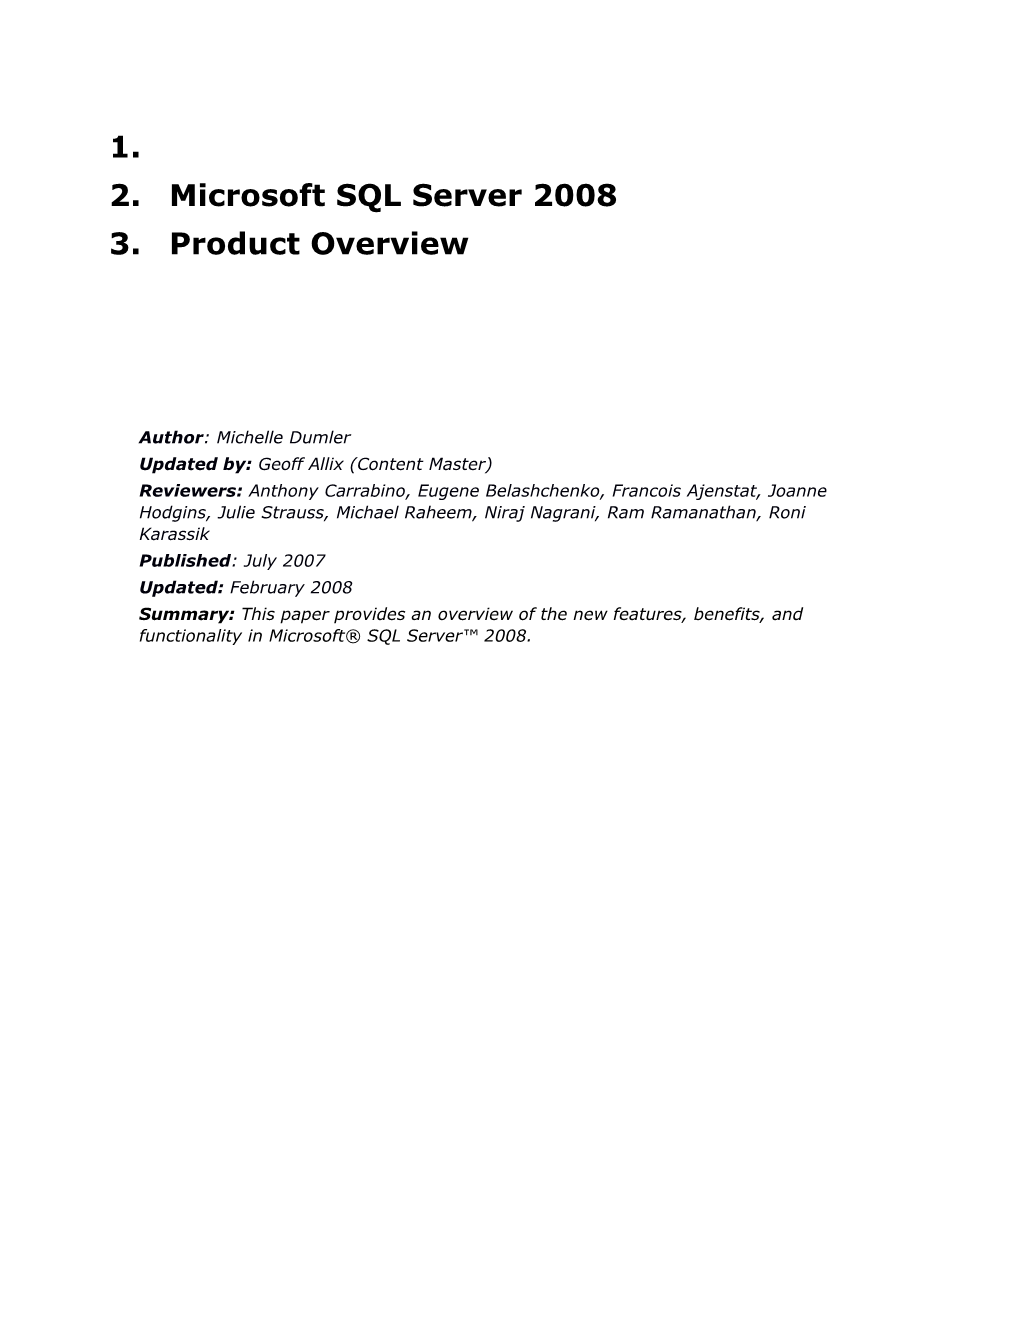 Filename: SQL2008 Productoverview Jstrauss 0912071